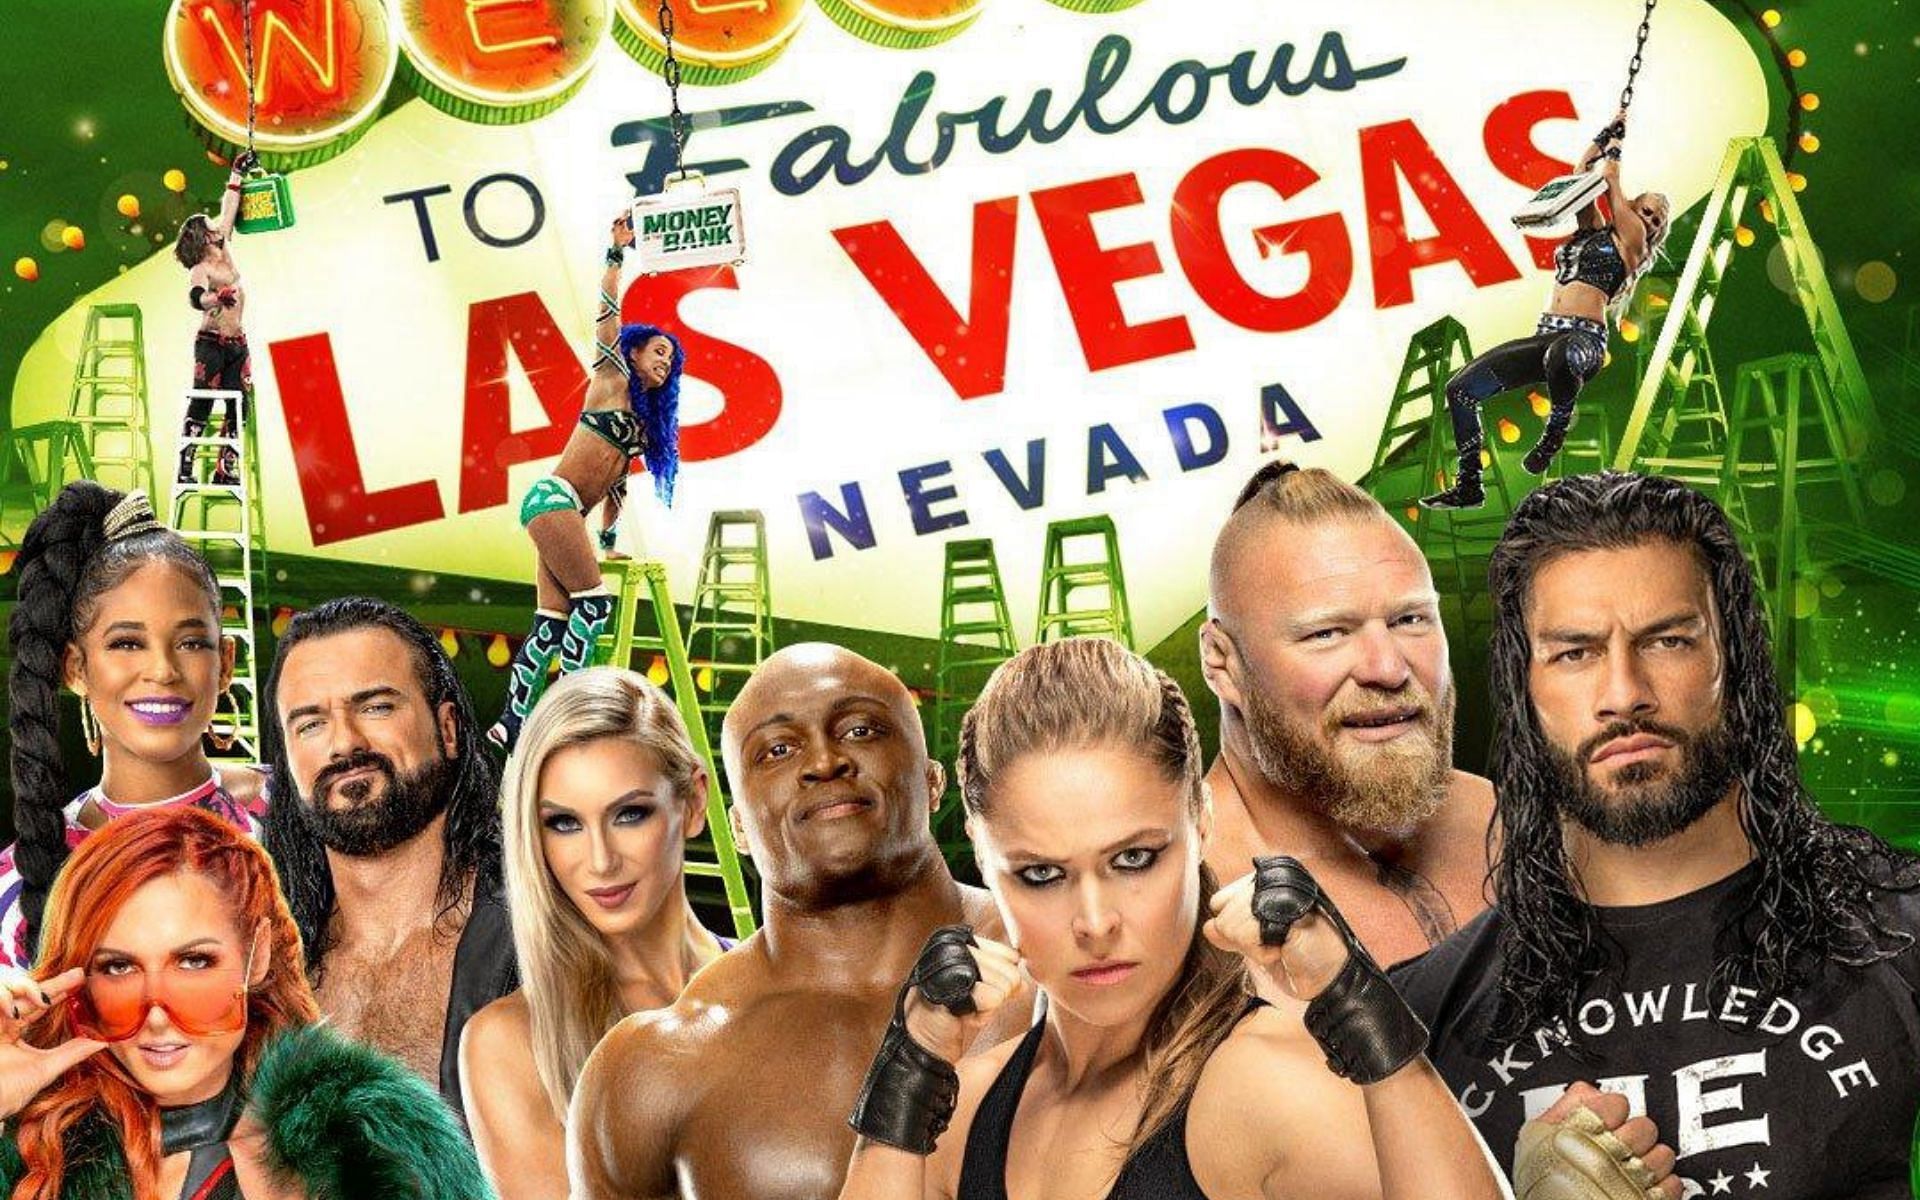 The official poster for Money in the Bank 2022